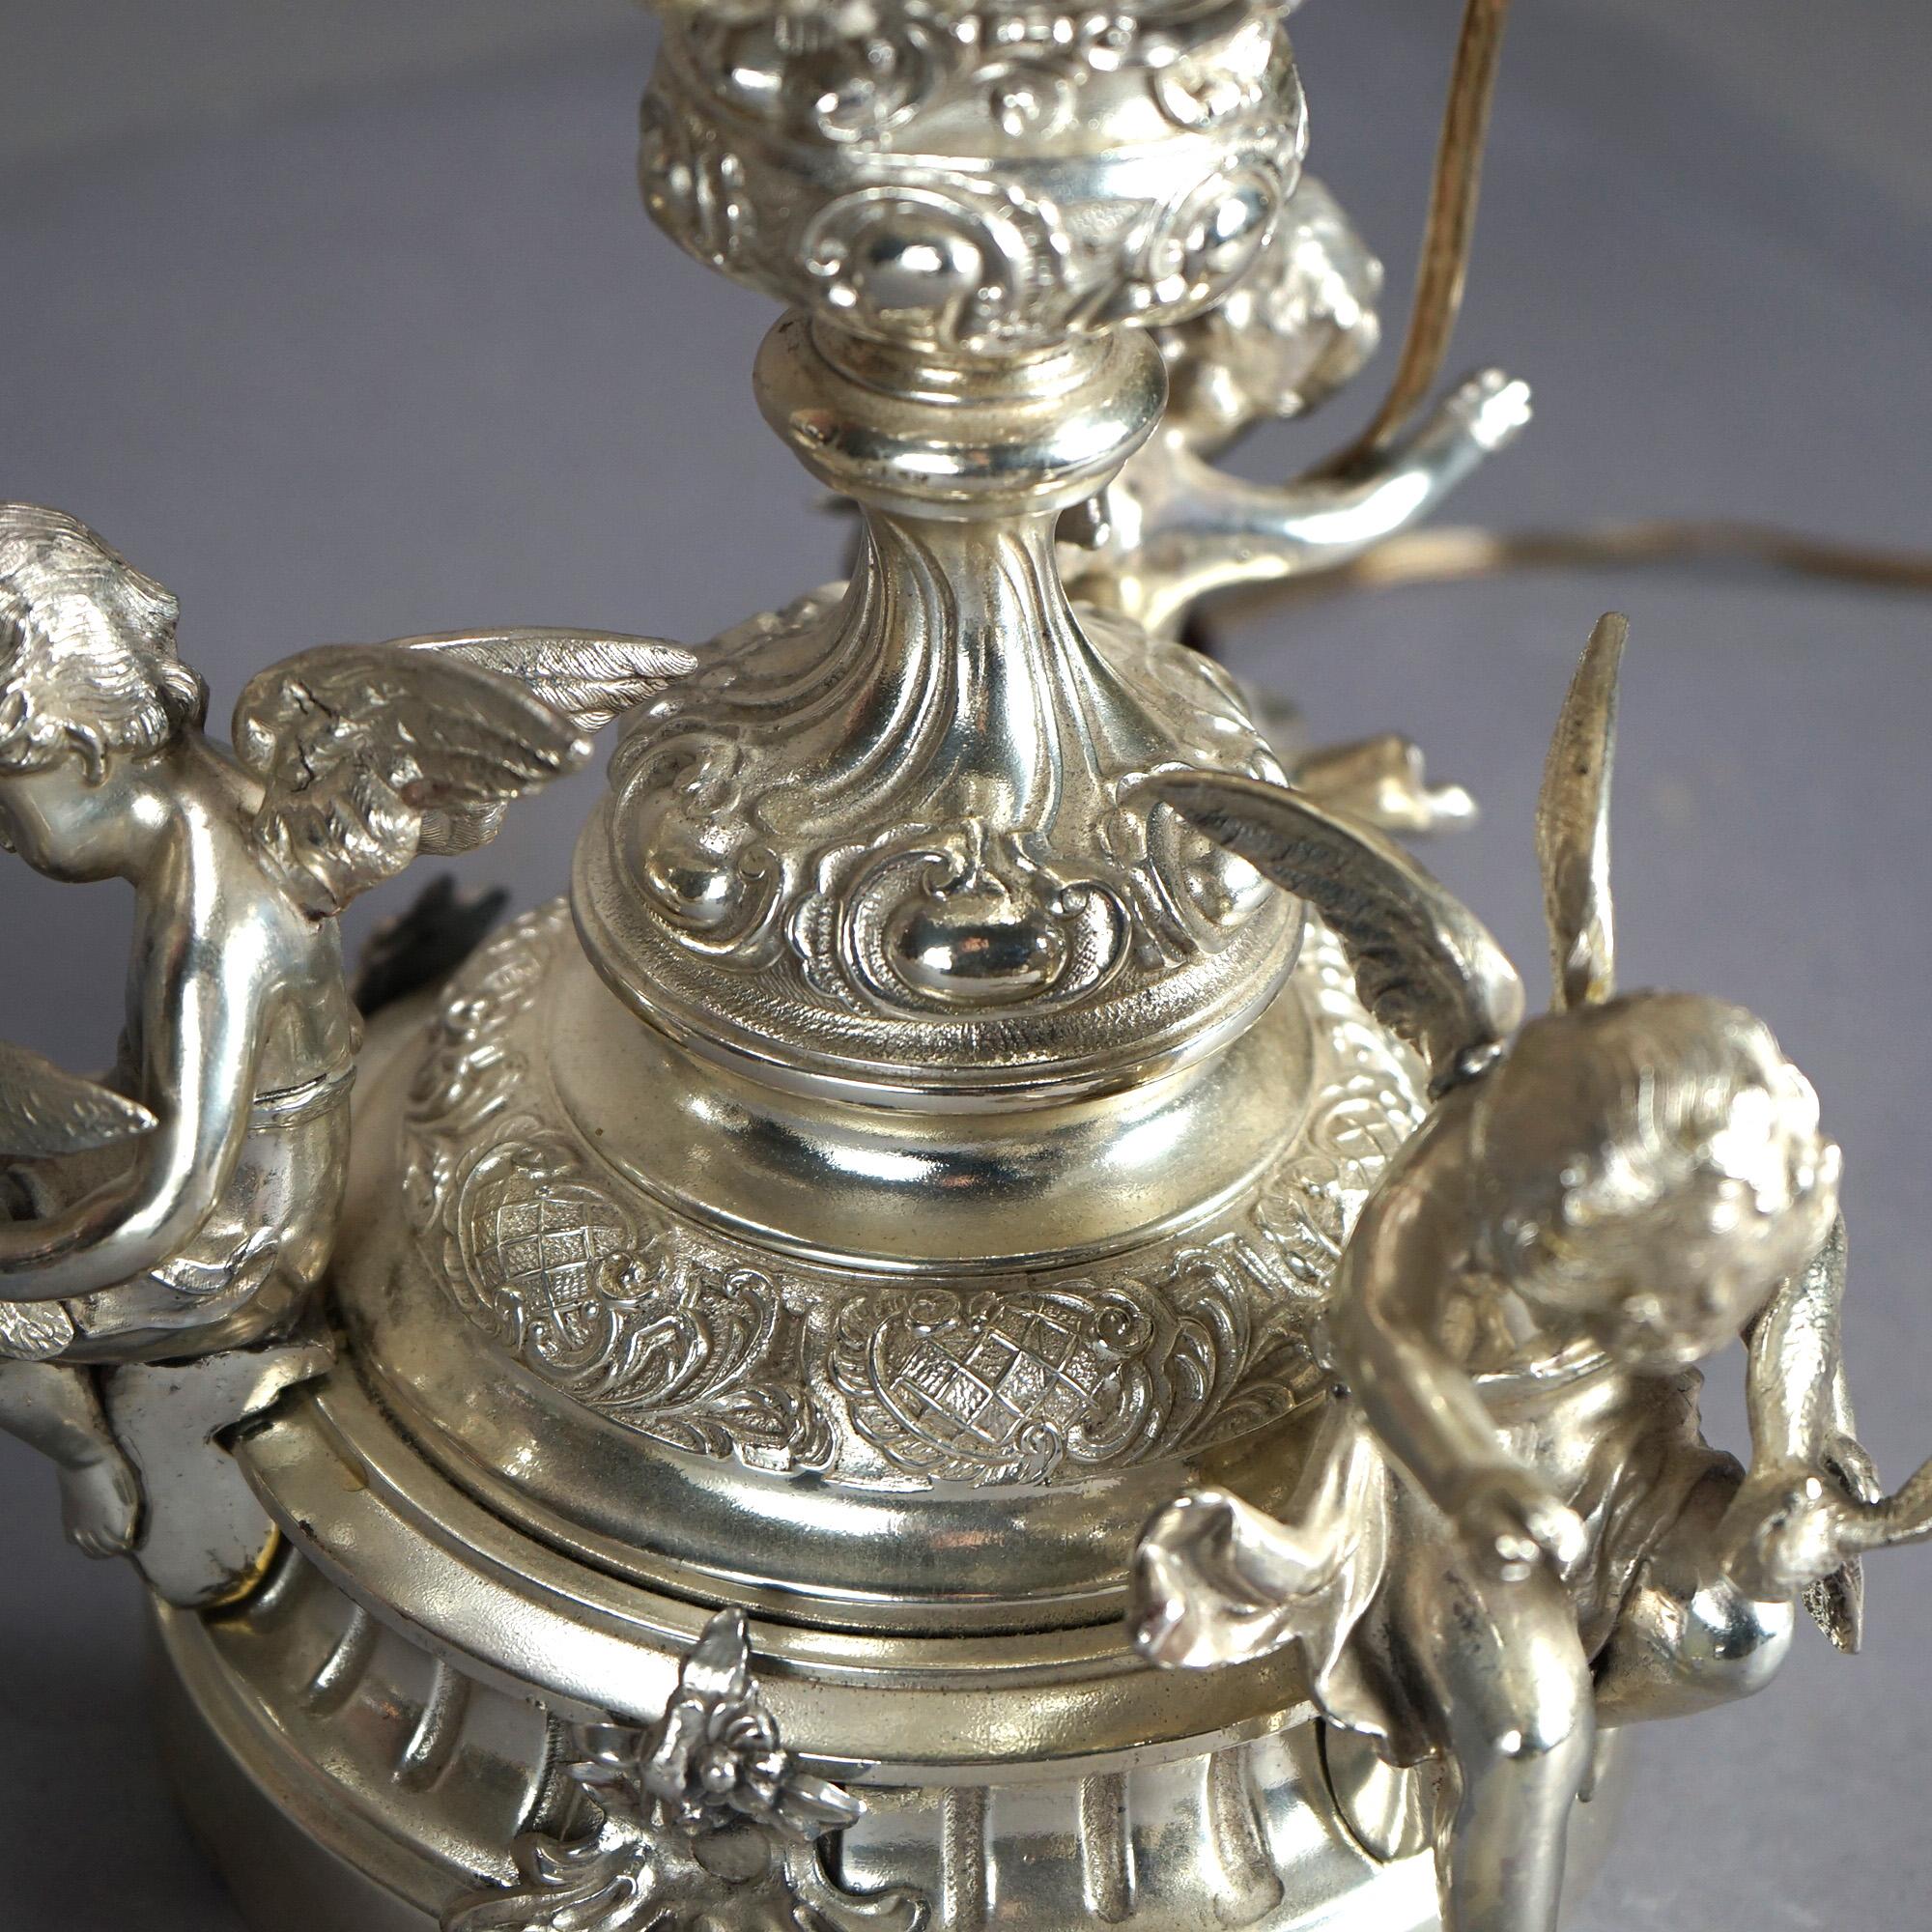 Antique Rococo Figural Silver Plate Parlor Lamp With Winged Cherubs c1890 12